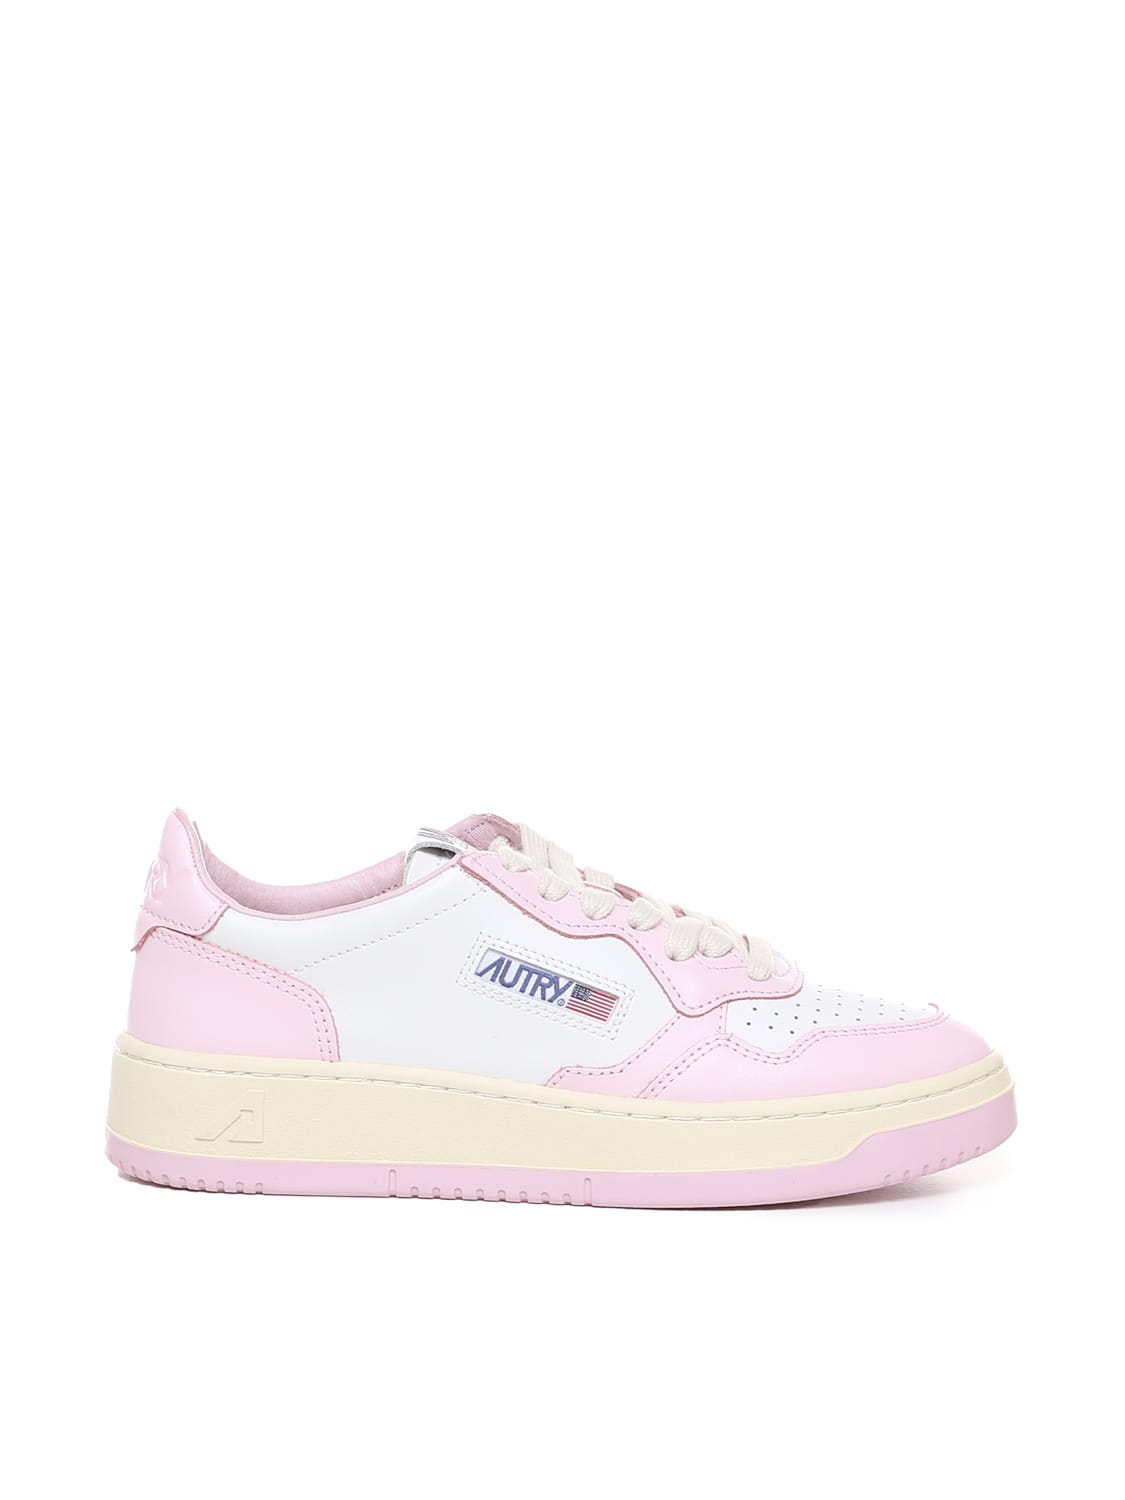 Autry Trainers Medalist Basse In Pelle Bicolore In White, Pink